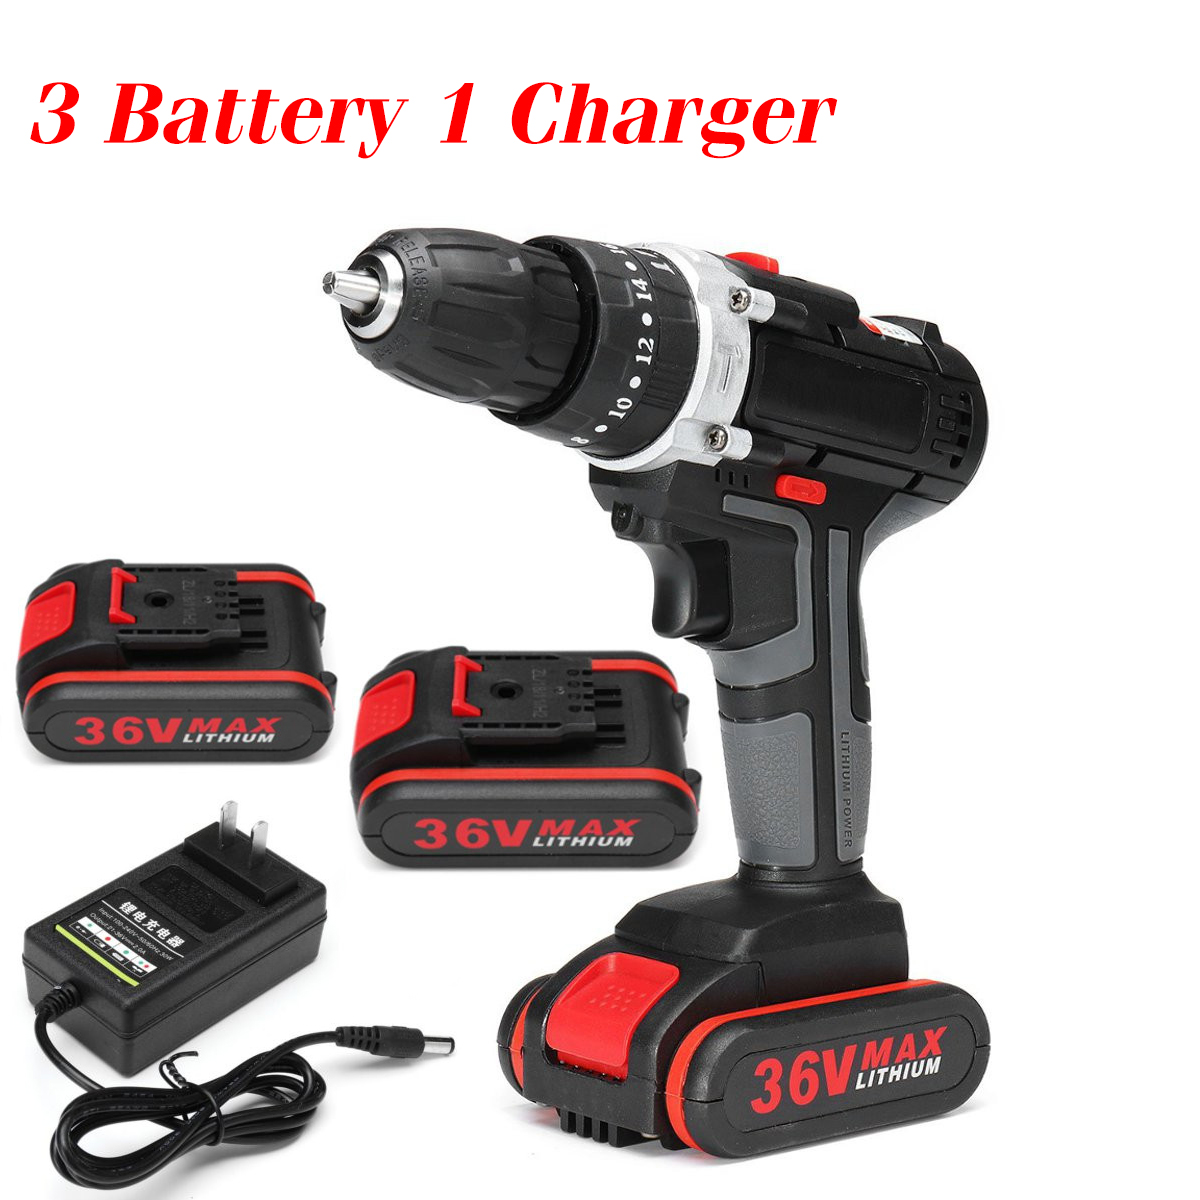 36VF-253-Speed-Cordless-Electric-Power-Impact-Drill-Torque-Adjustable-with-3-Battery-1631496-1